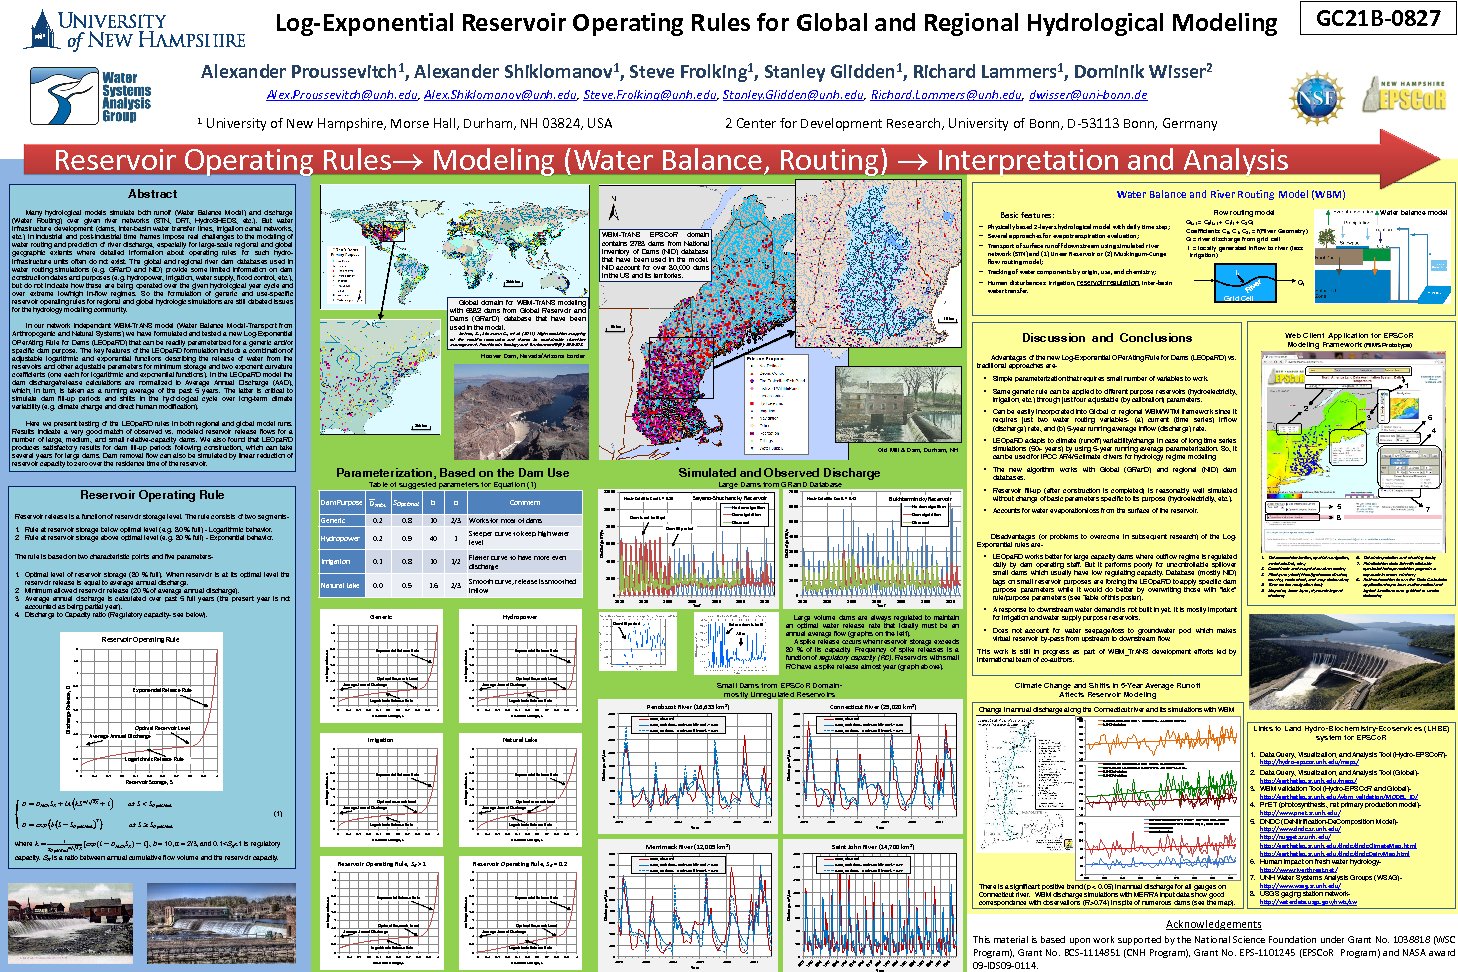 Log-Exponential Reservoir Operating Rules For Global And Regional Hydrological Modeling by alexp